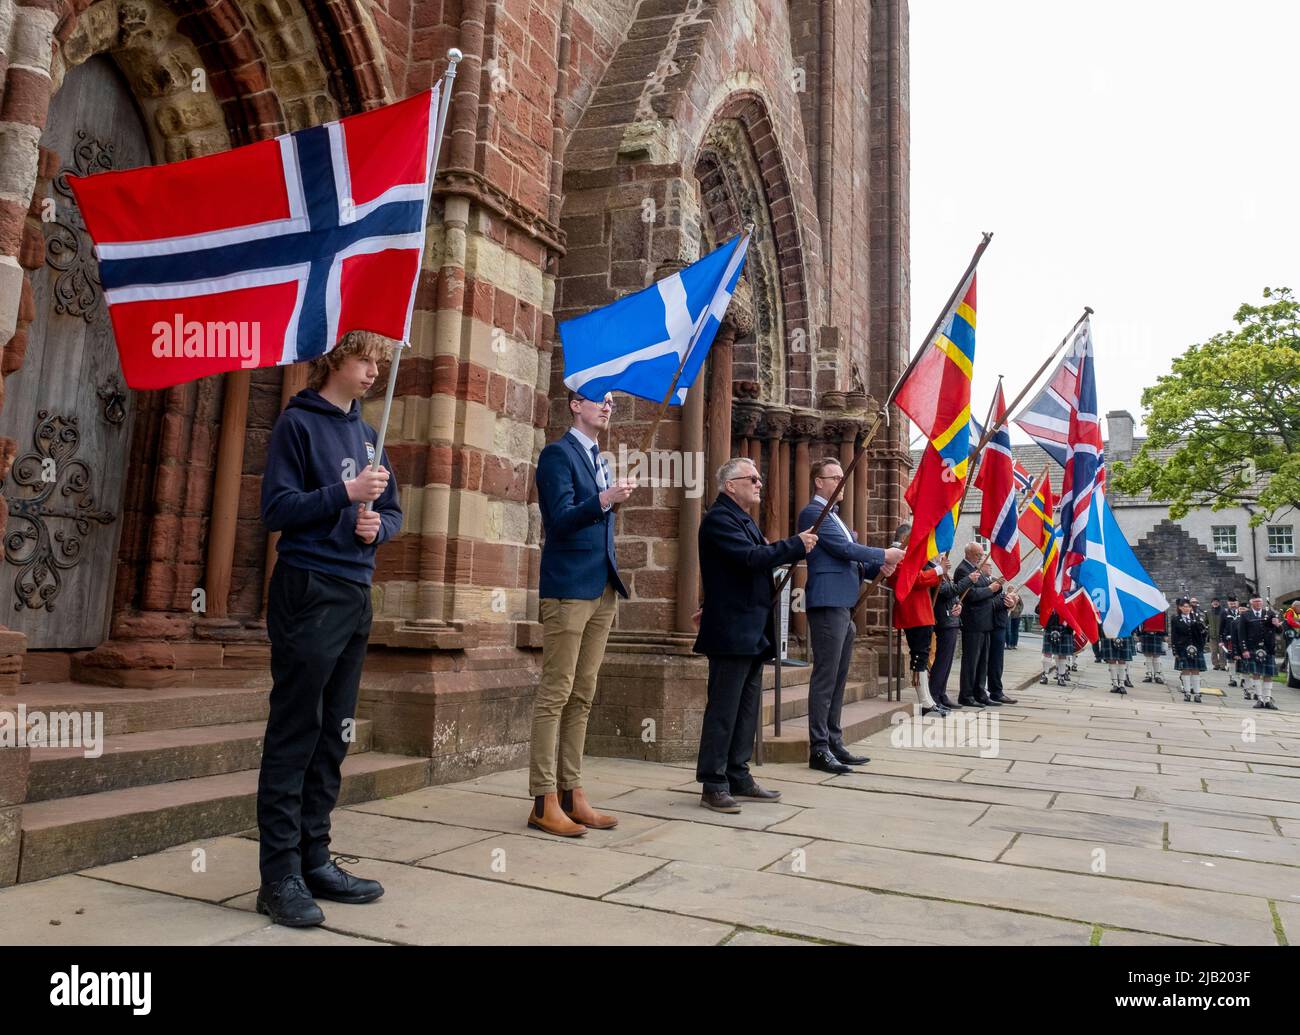 Flag bearers hold up the flags of Norway and Scotland outside St Magnus Cathedral to celebrate Norway Day in Kirkwall town centre, Orkney islands, Sco. Stock Photo